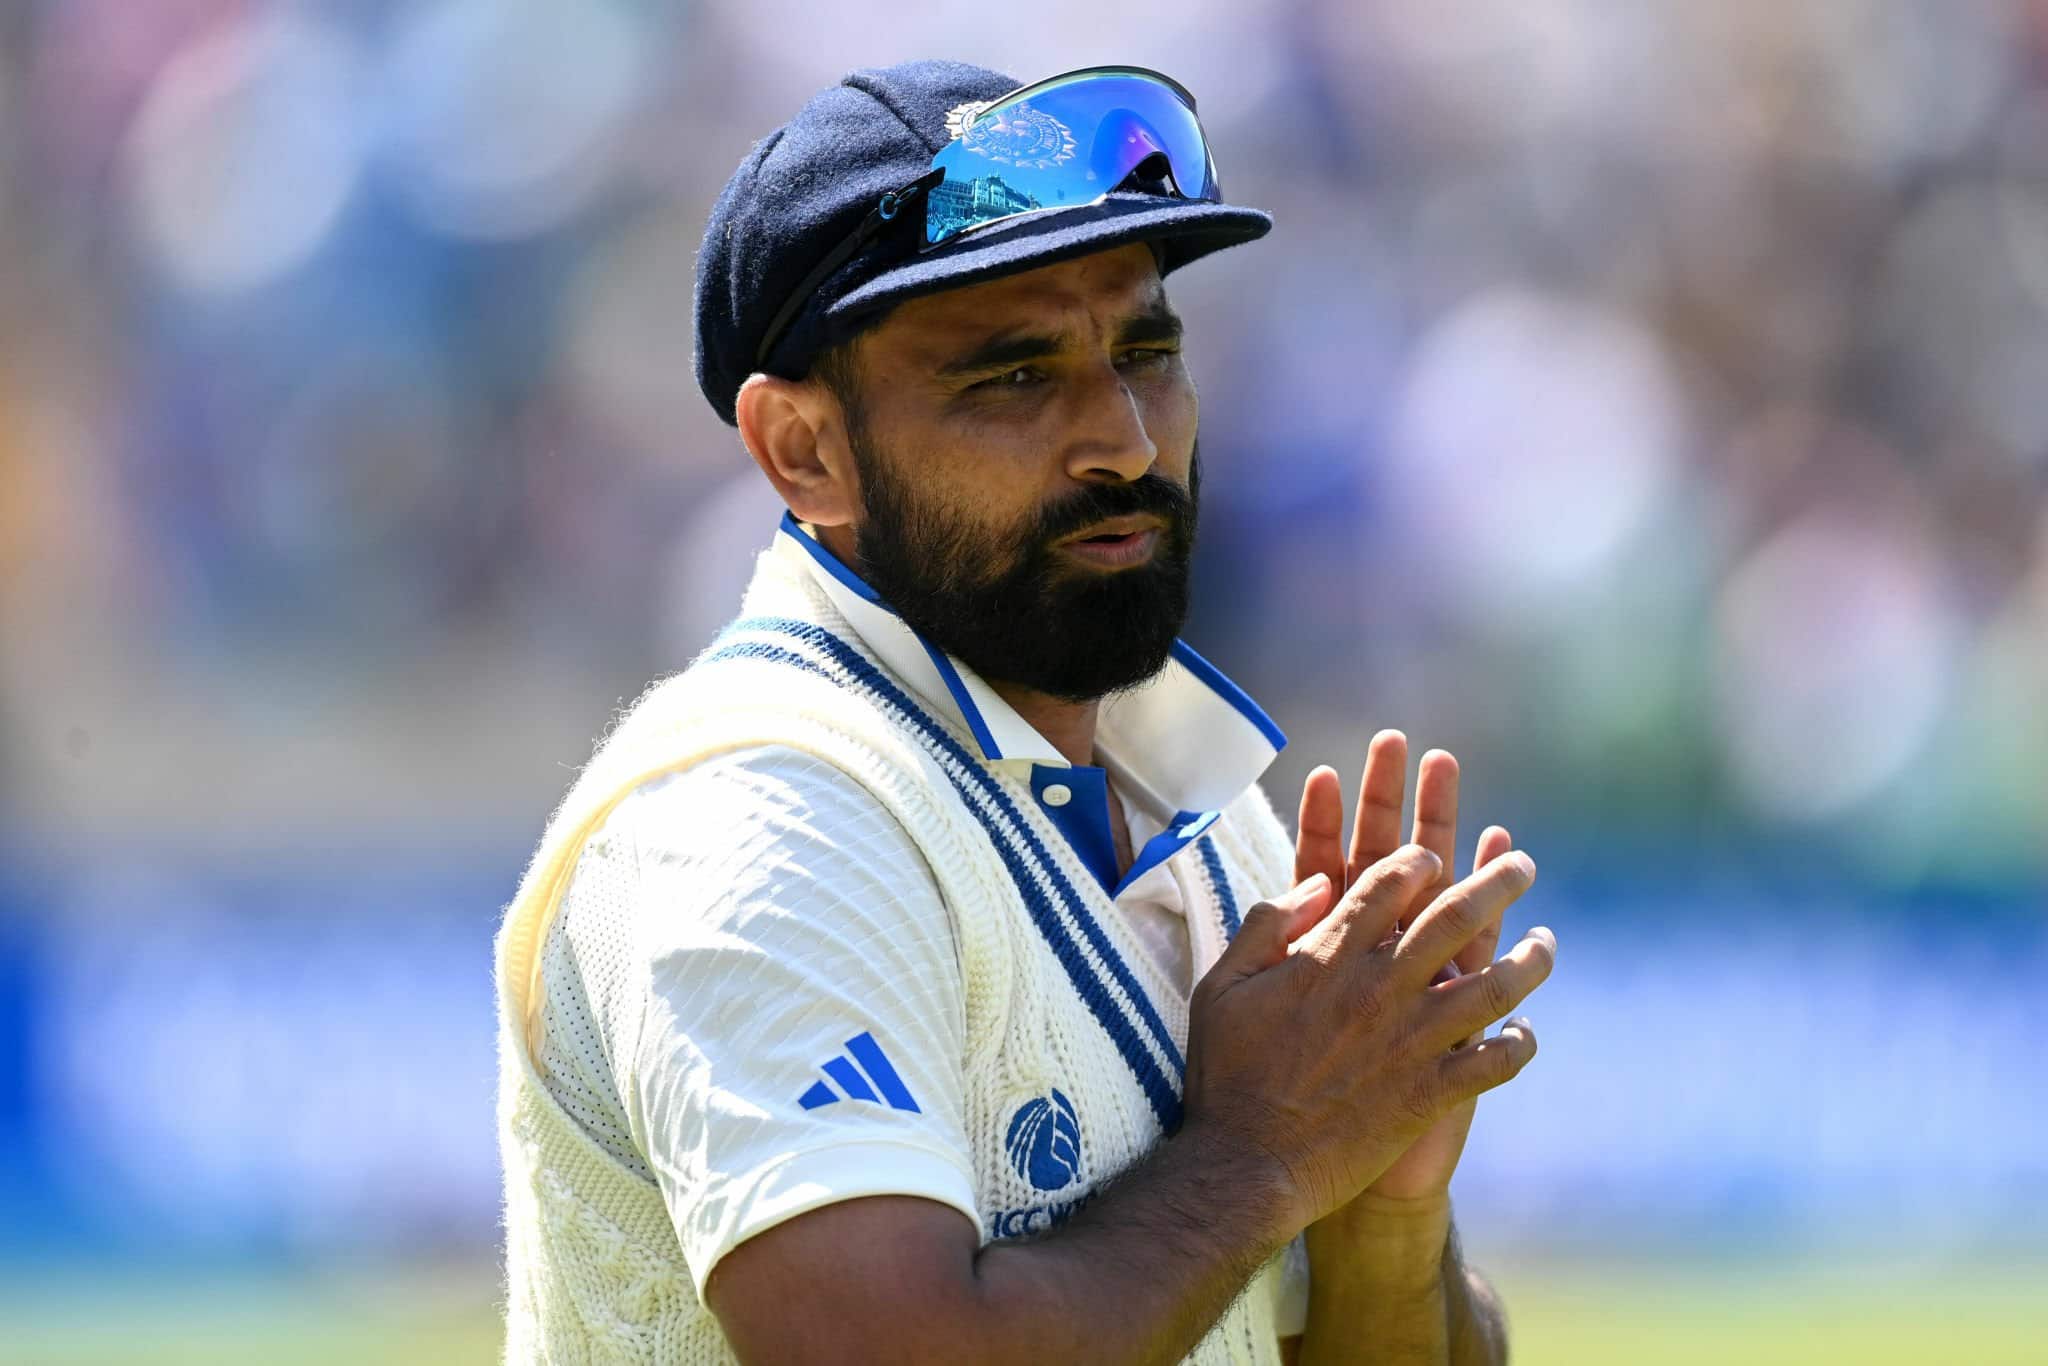 'Don't Want To Be In Doubt' - Mohammed Shami On His Availability In India Vs England Tests